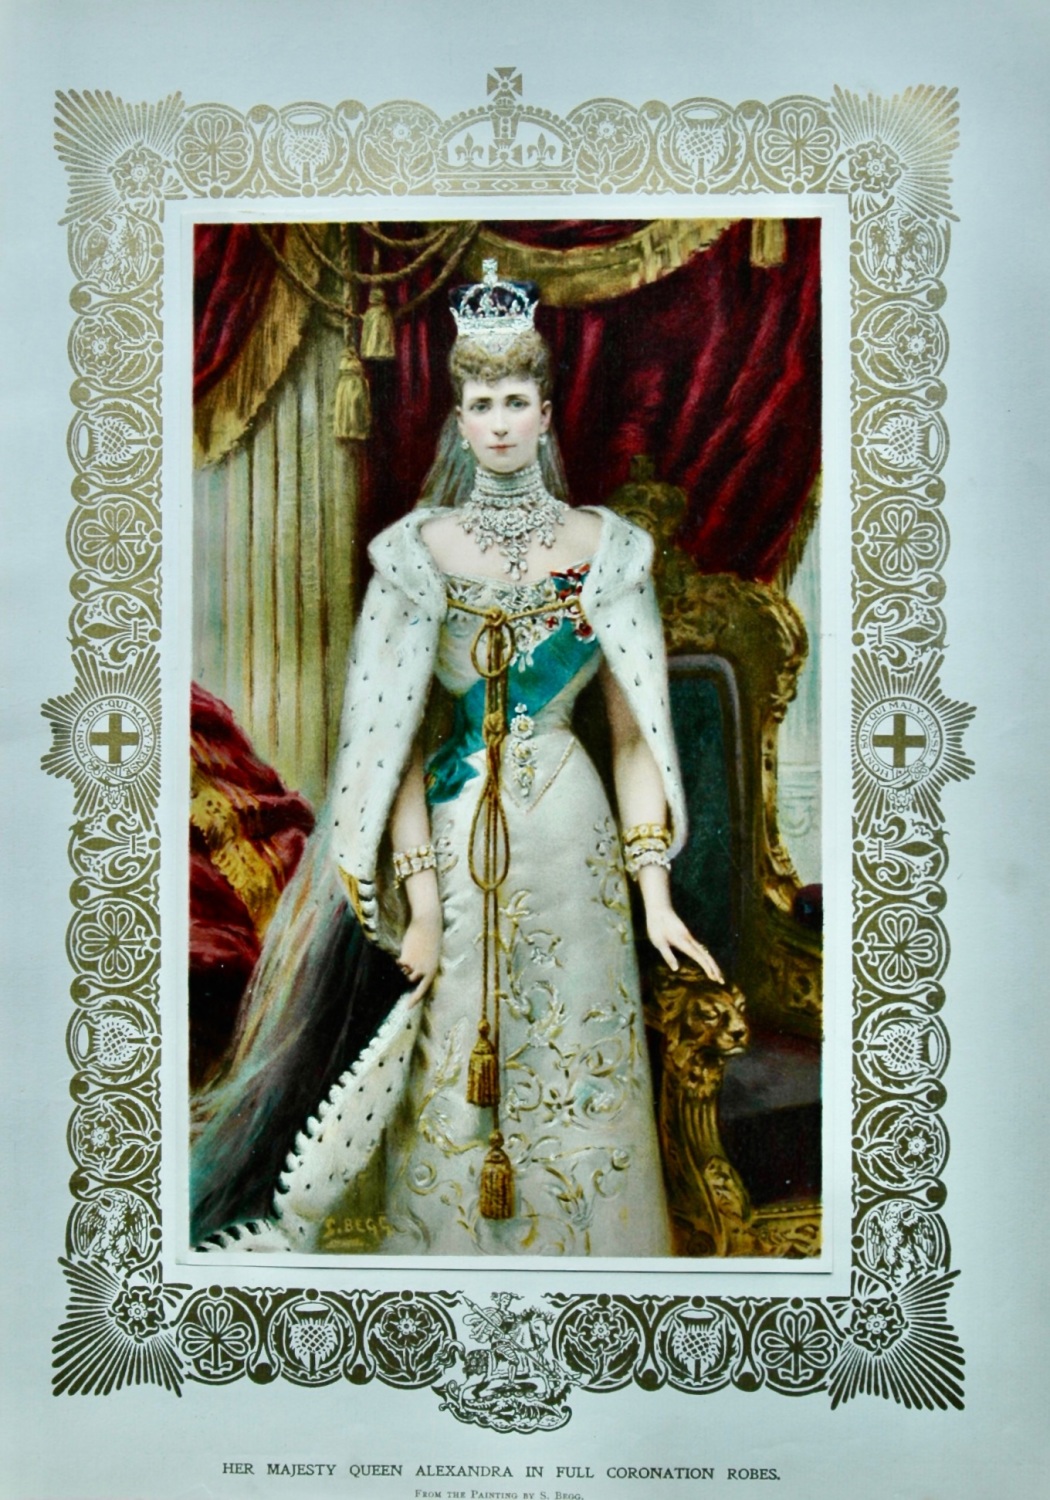 Her Majesty Queen Alexandra in Full Coronation Robes.  1902.